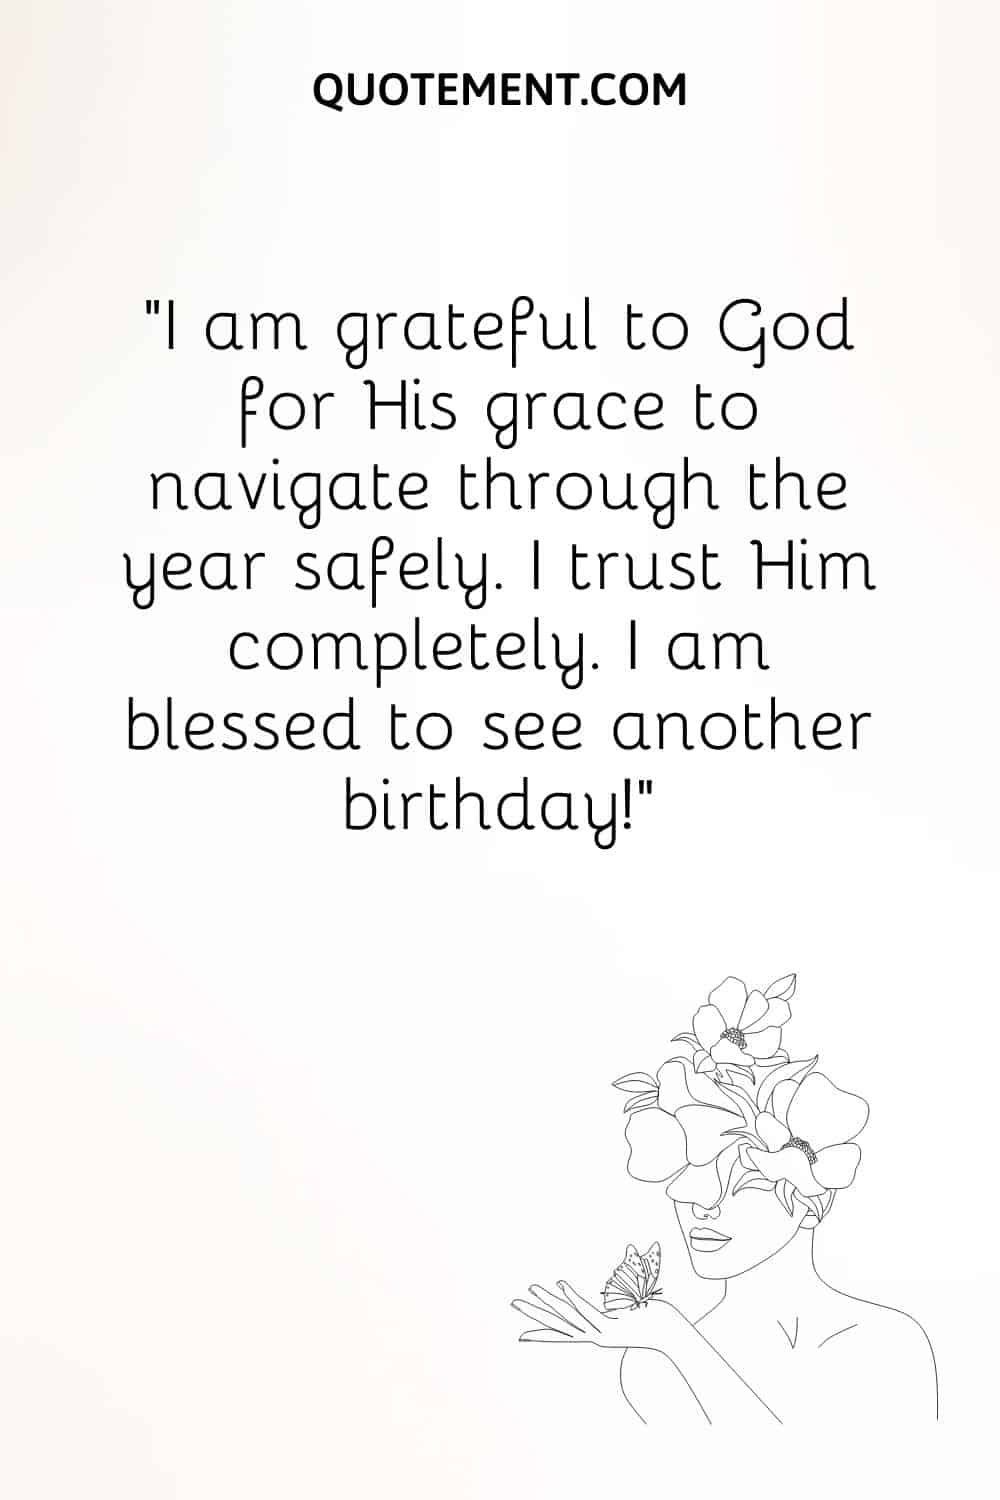 I am grateful to God for His grace to navigate through the year safely